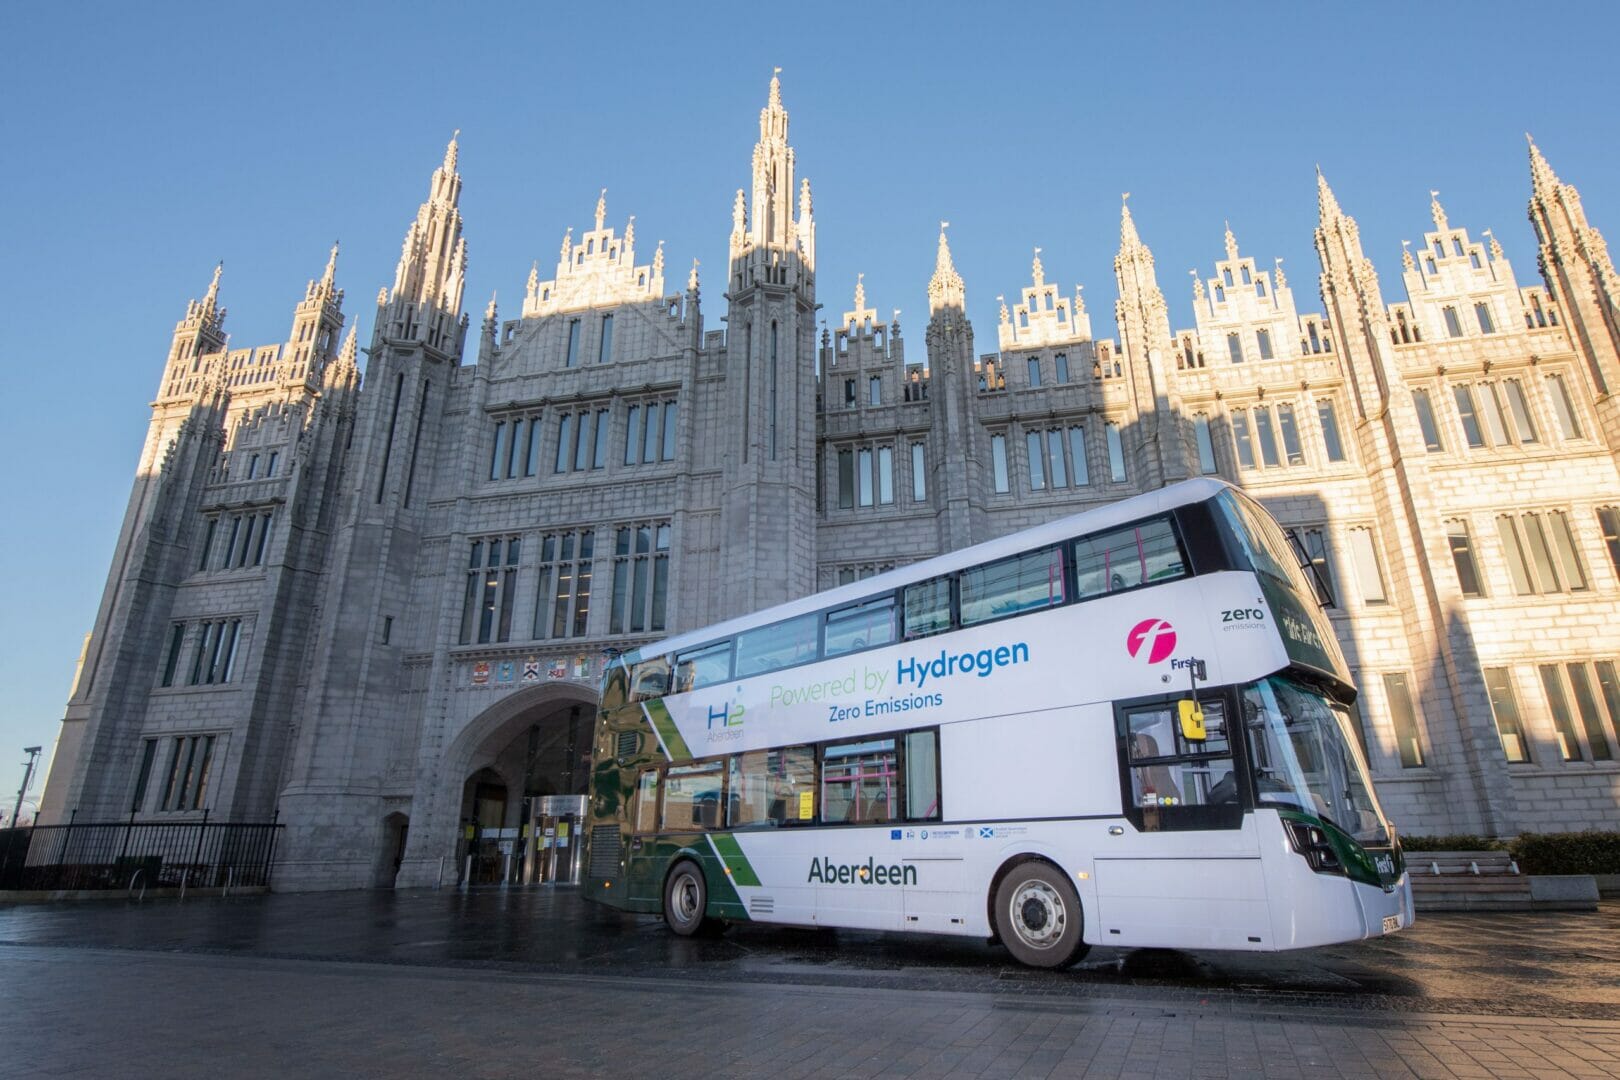 HDR | Hurley Palmer Flatt helped First Bus get Aberdeen ‘hydrogen ready’ with the introduction of the world’s first hydrogen-powered double-decker buses @hpf_group